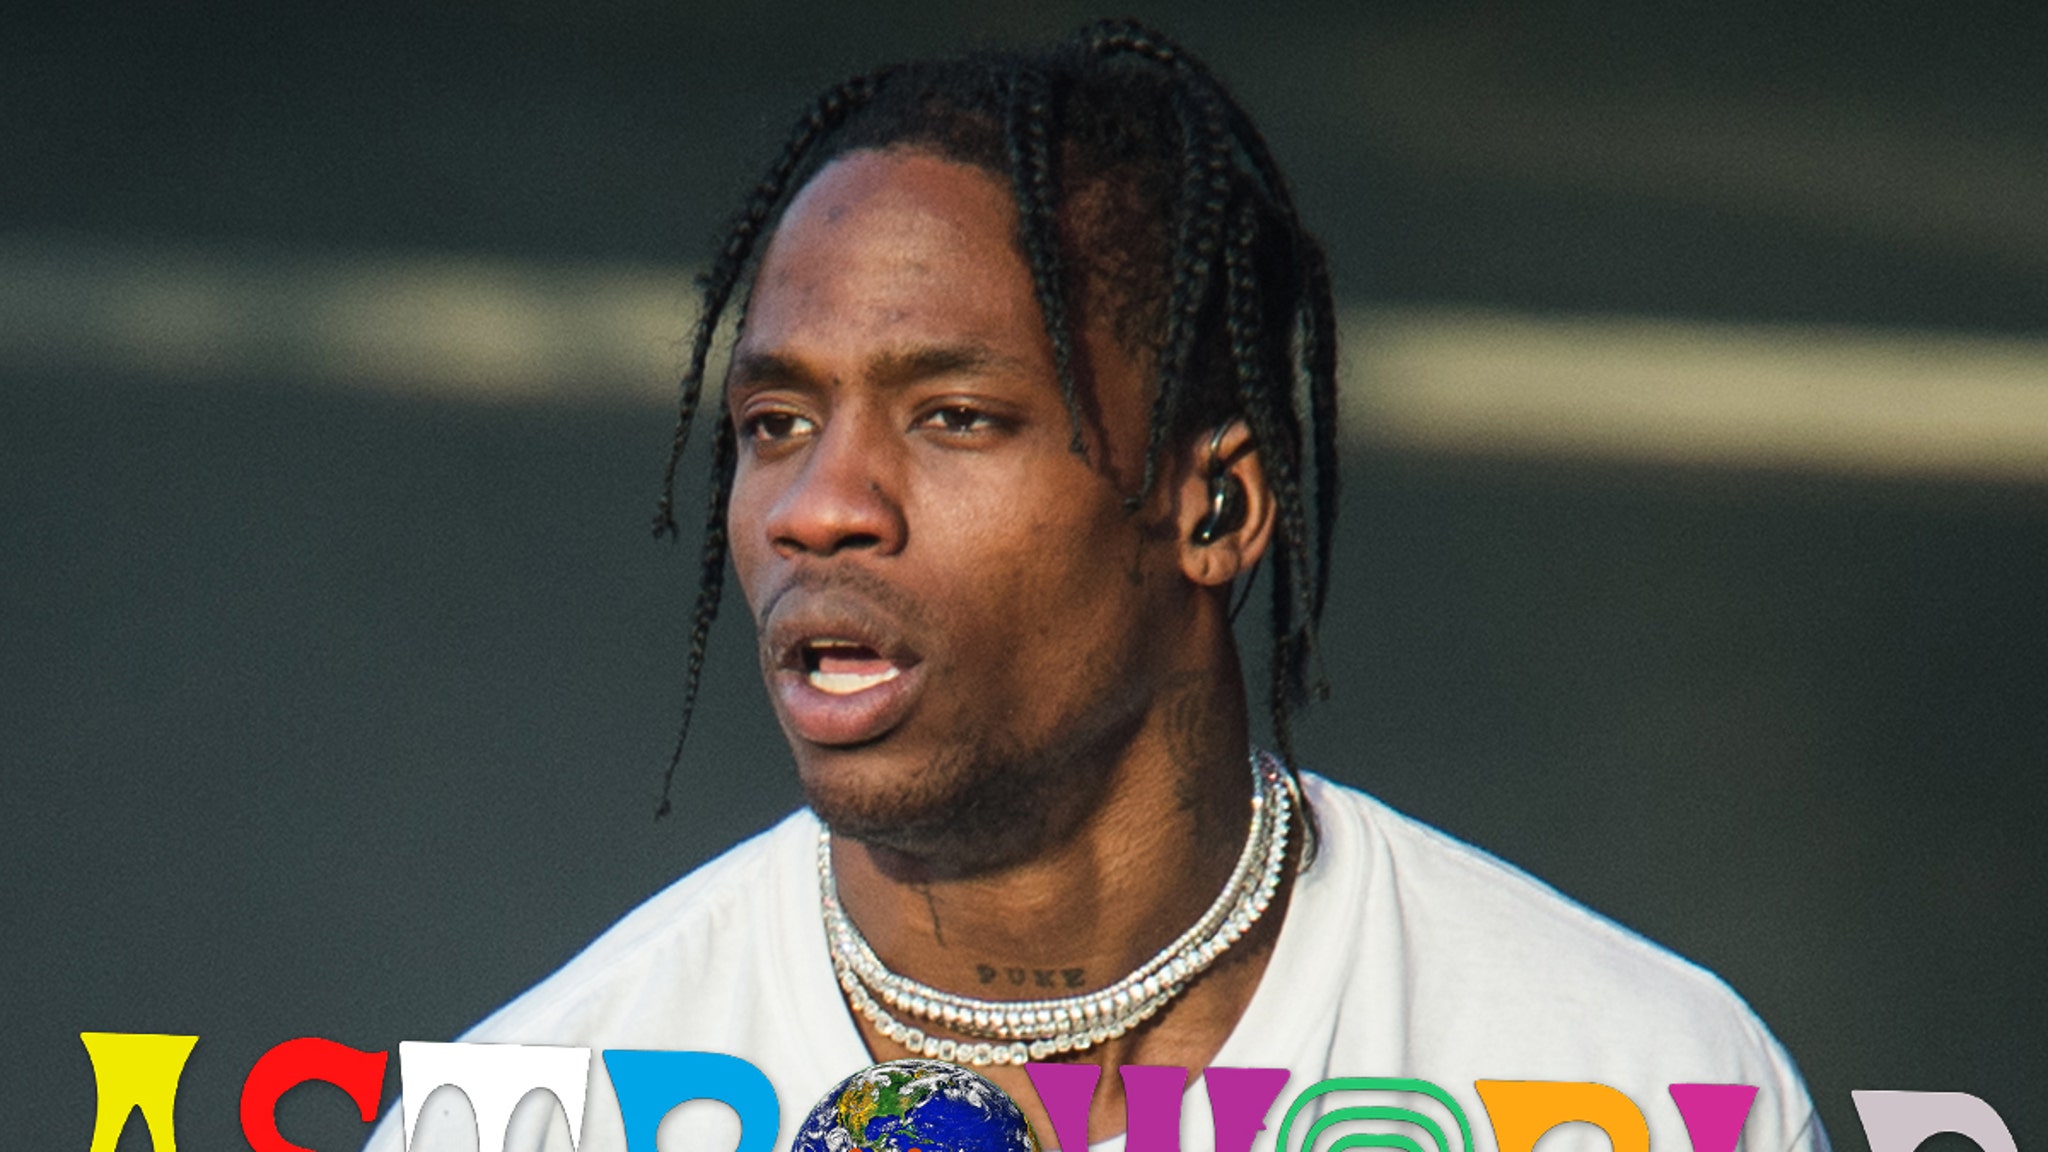 Travis Scott Holed Up at Home, Giving Victims' Families Room to Grieve